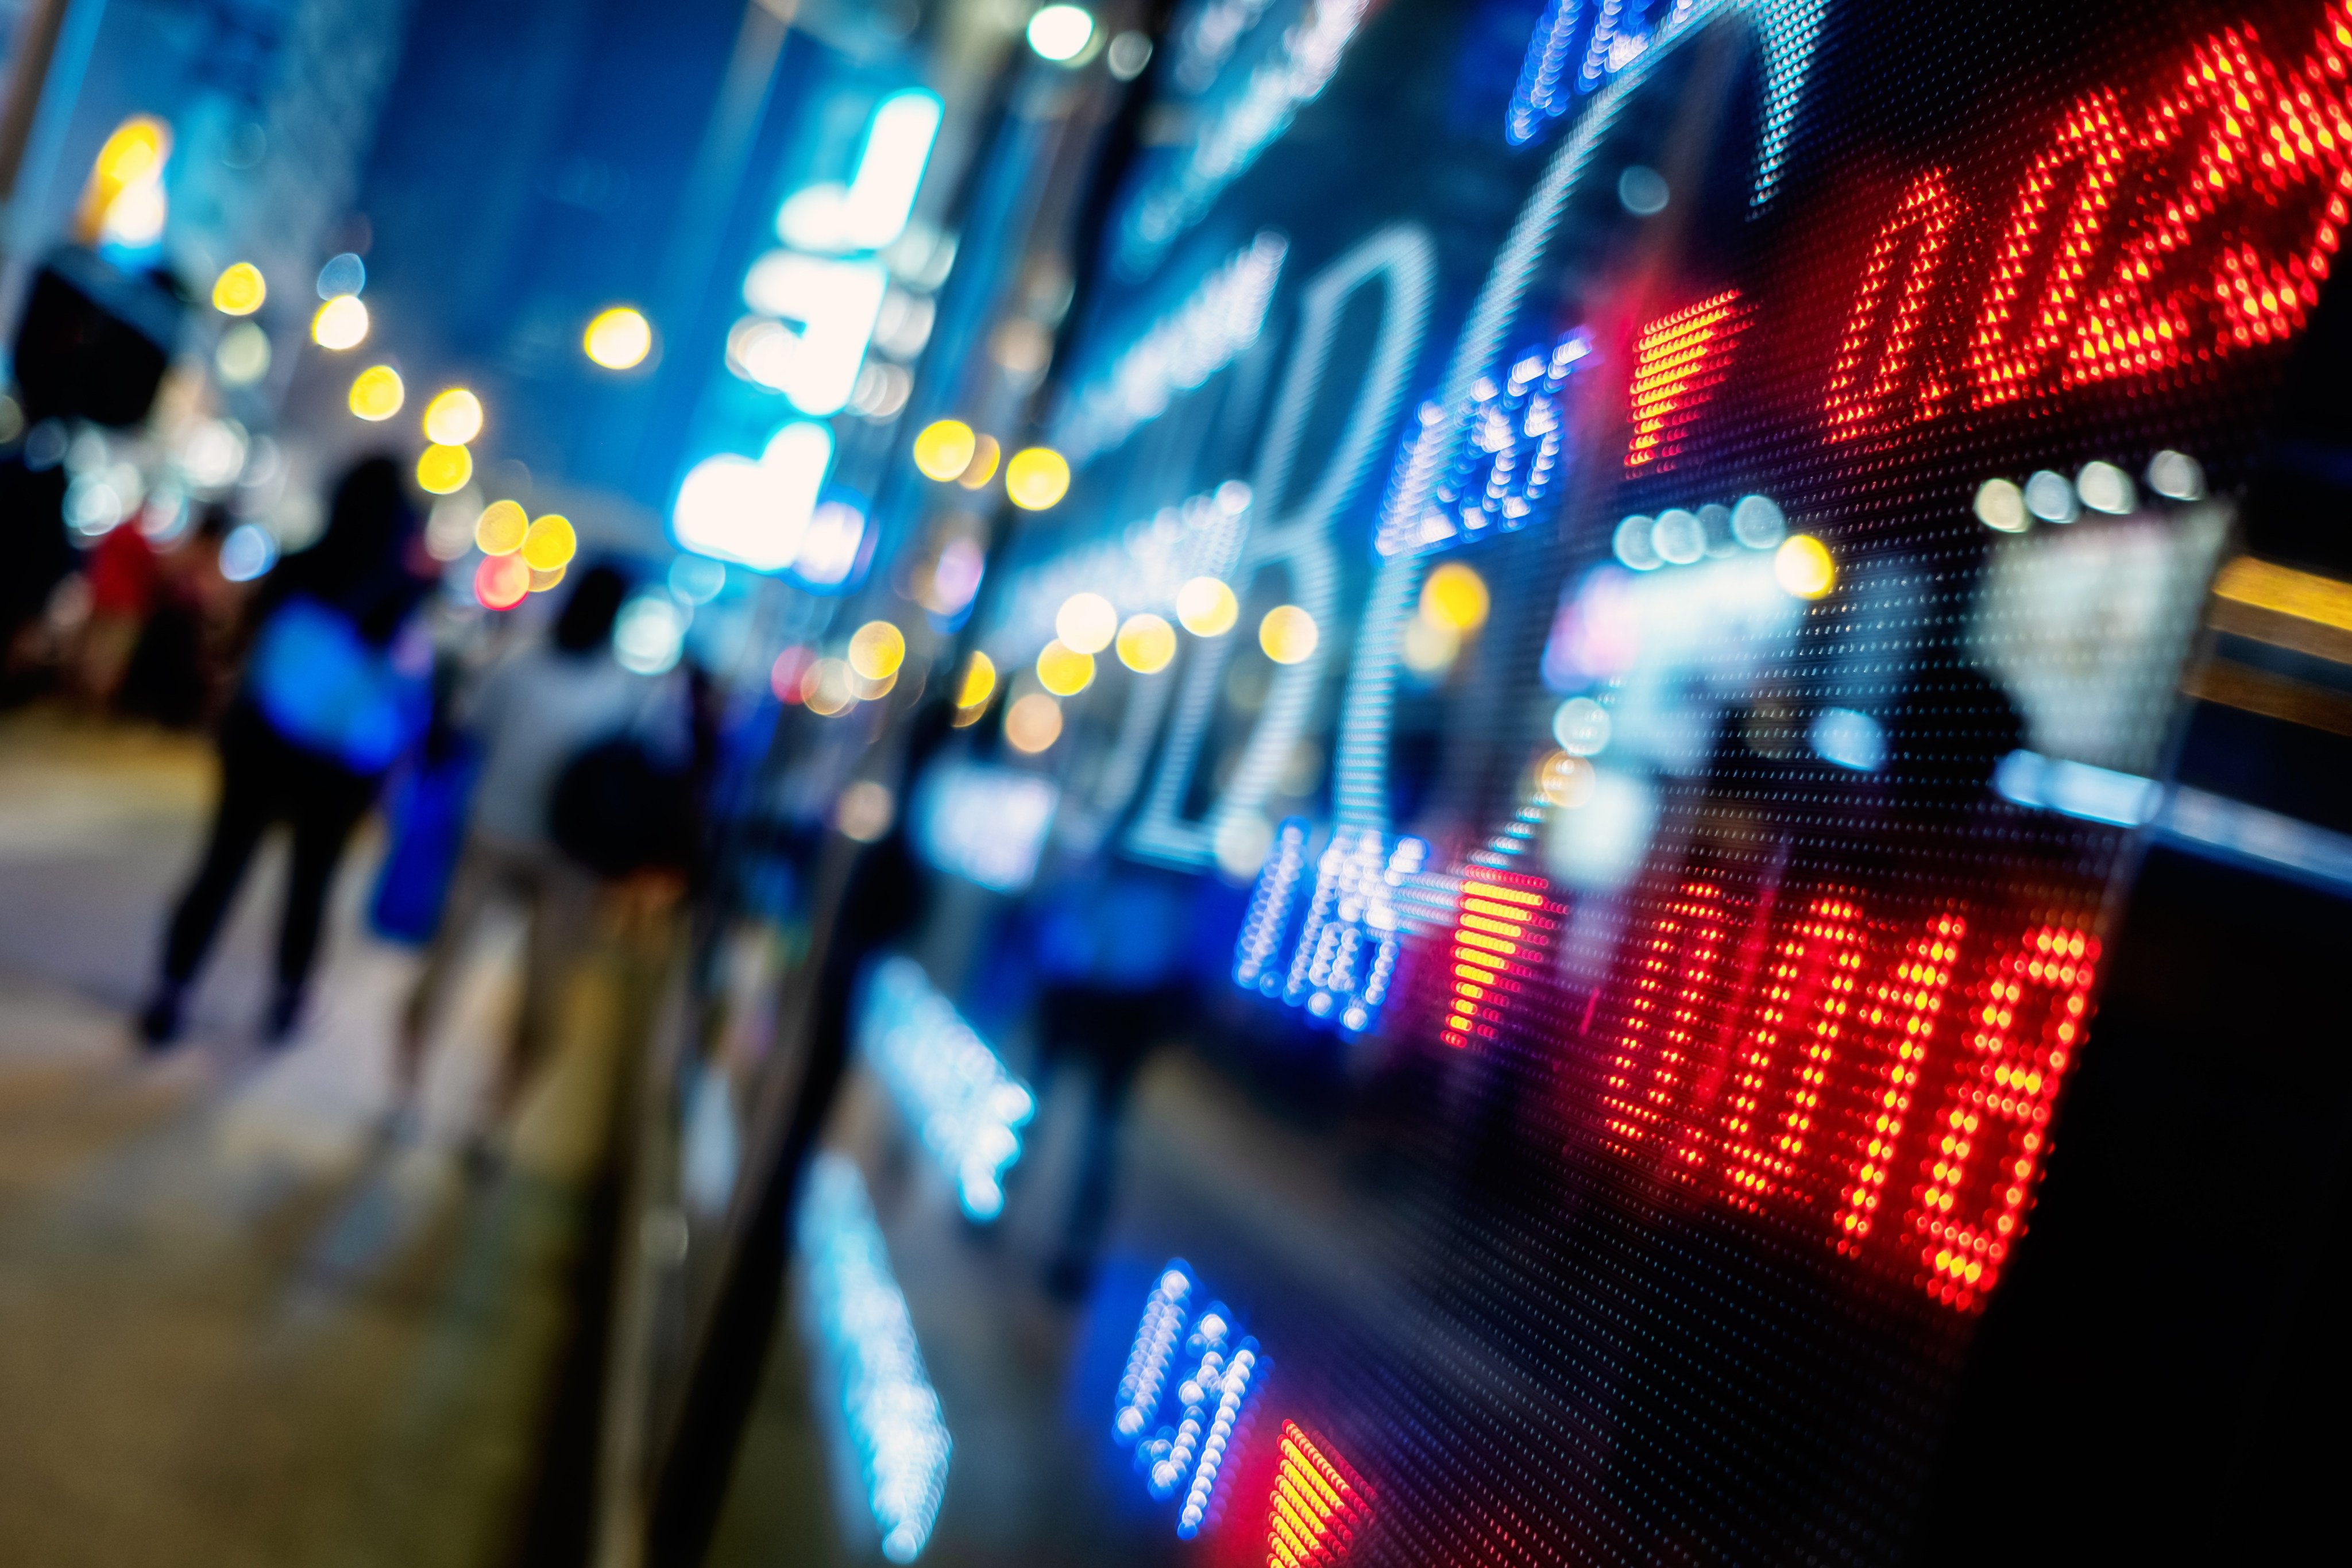 Recent China data misses are challenging bullish stock forecasts by market strategists. Photo: Shutterstock